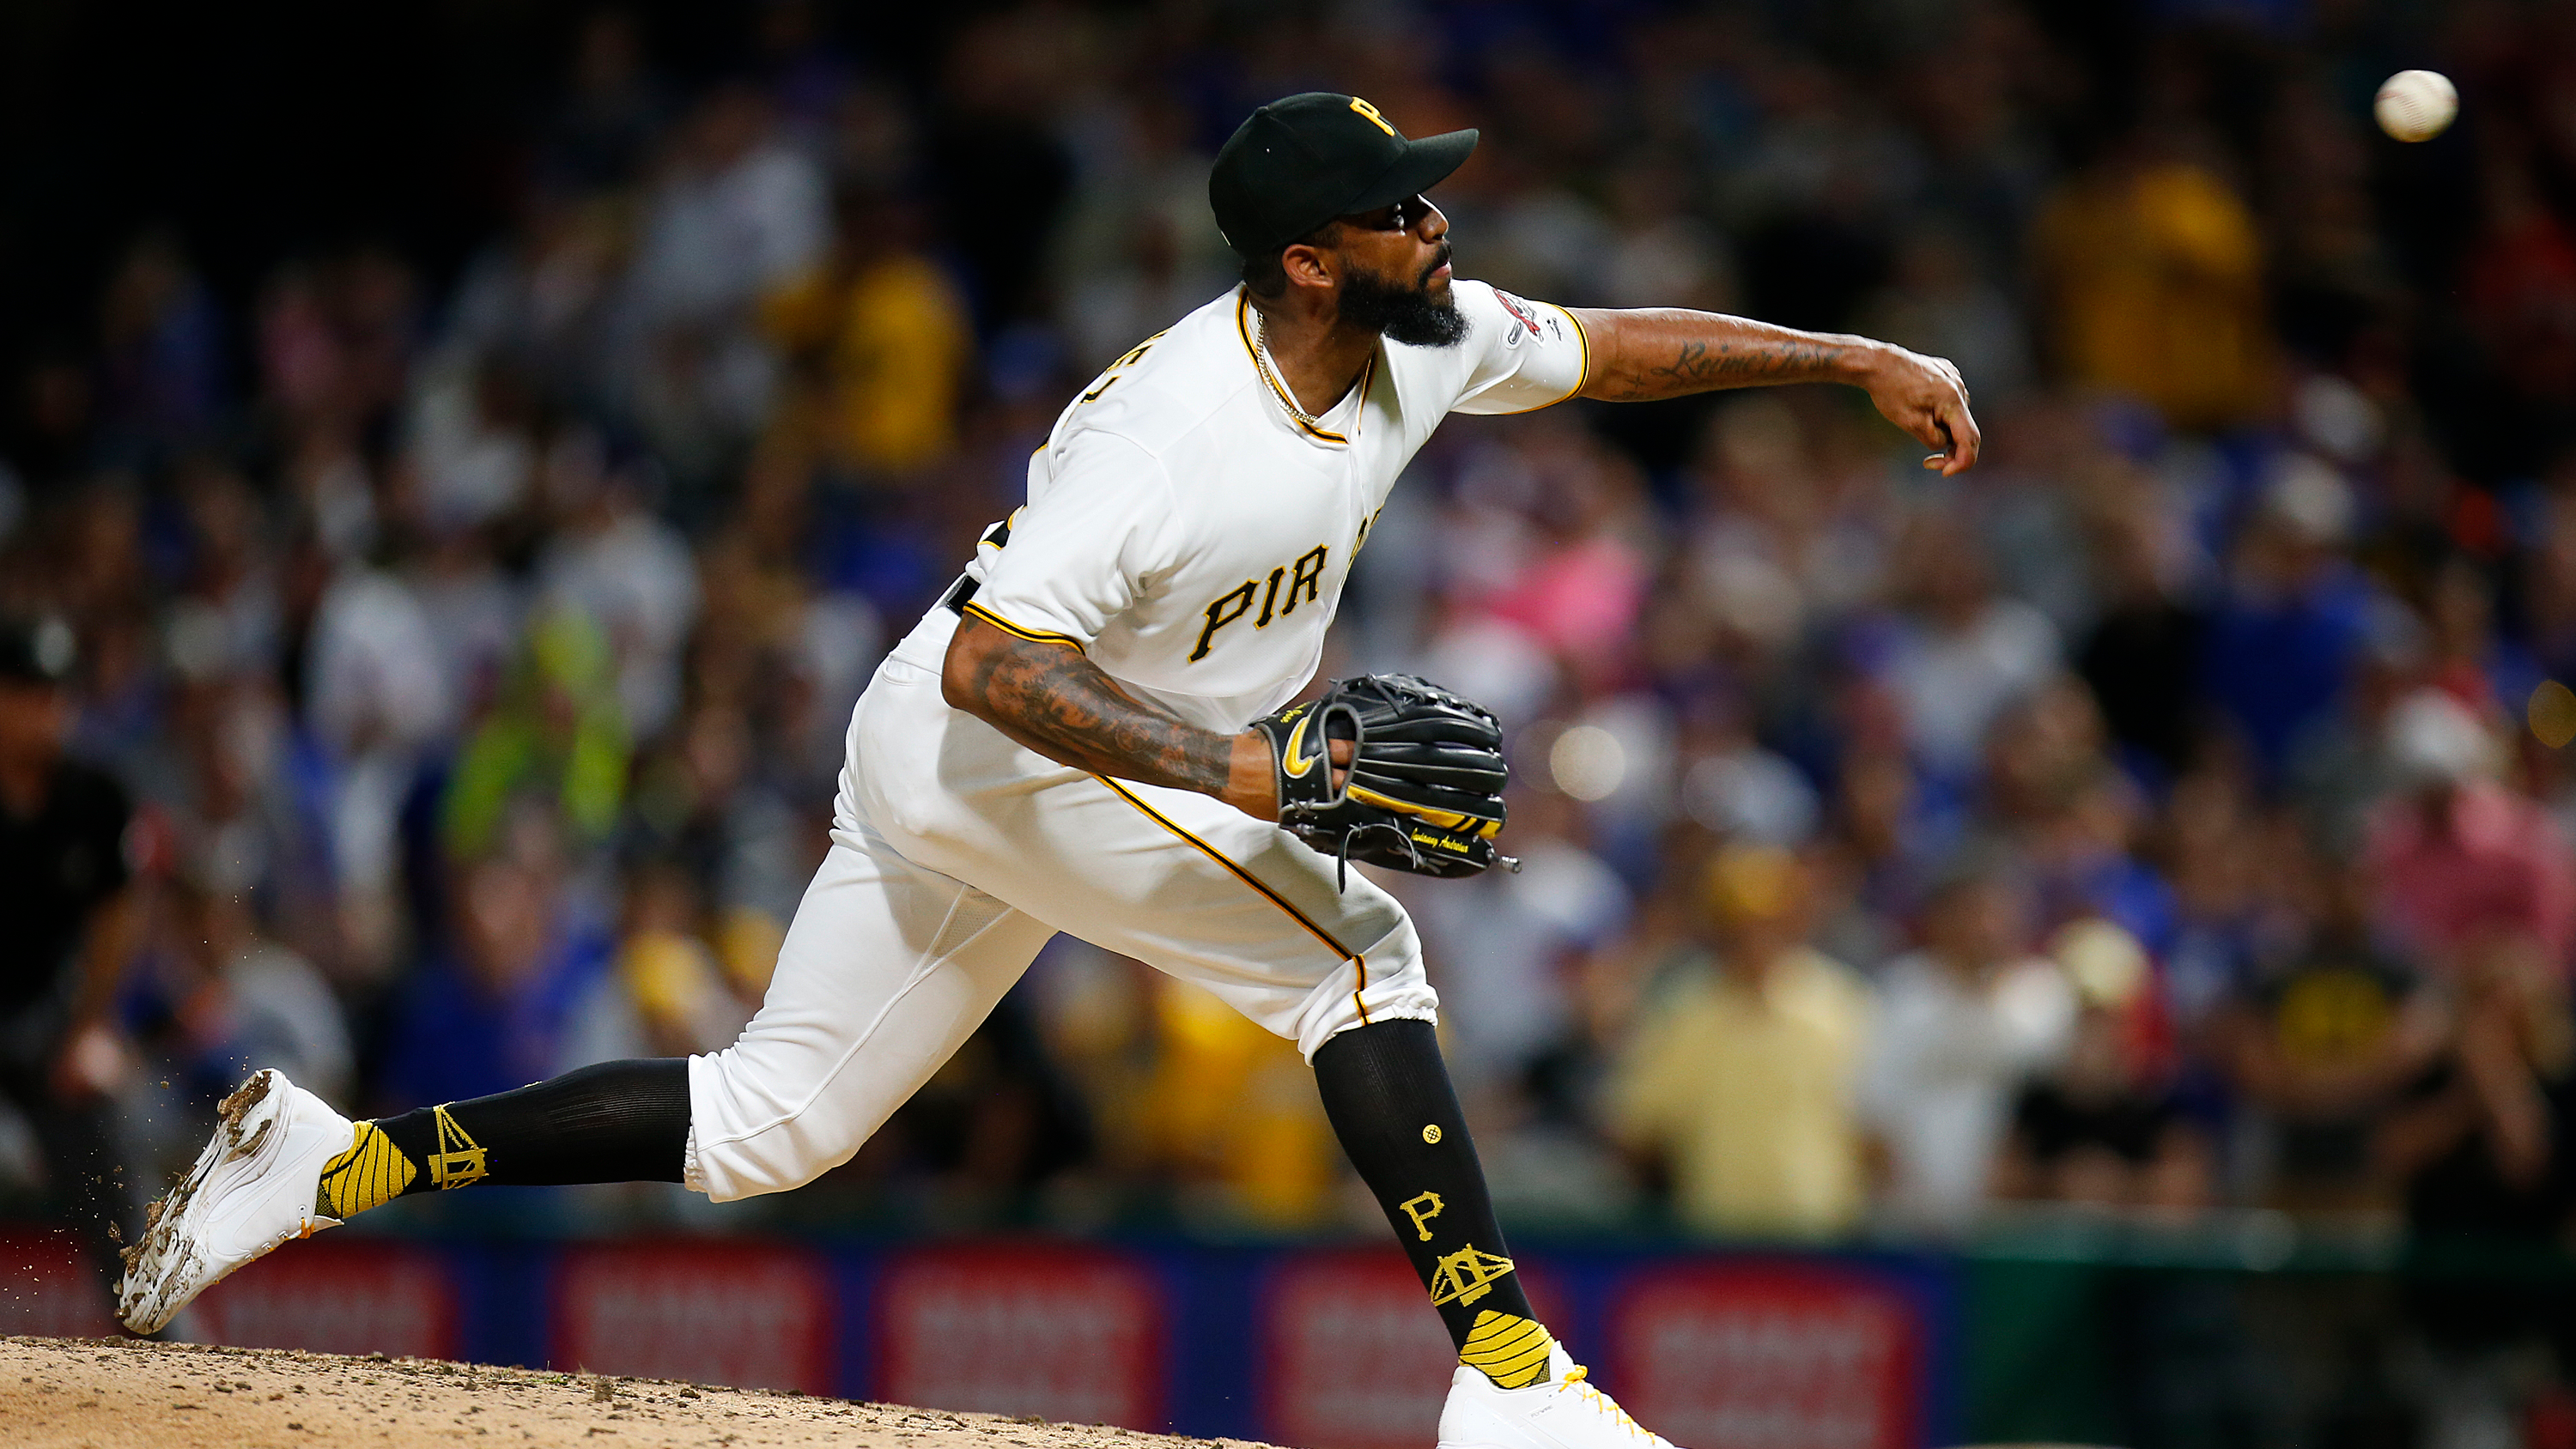 Pirates closer Felipe Vazquez attempted to have sex with 13-year